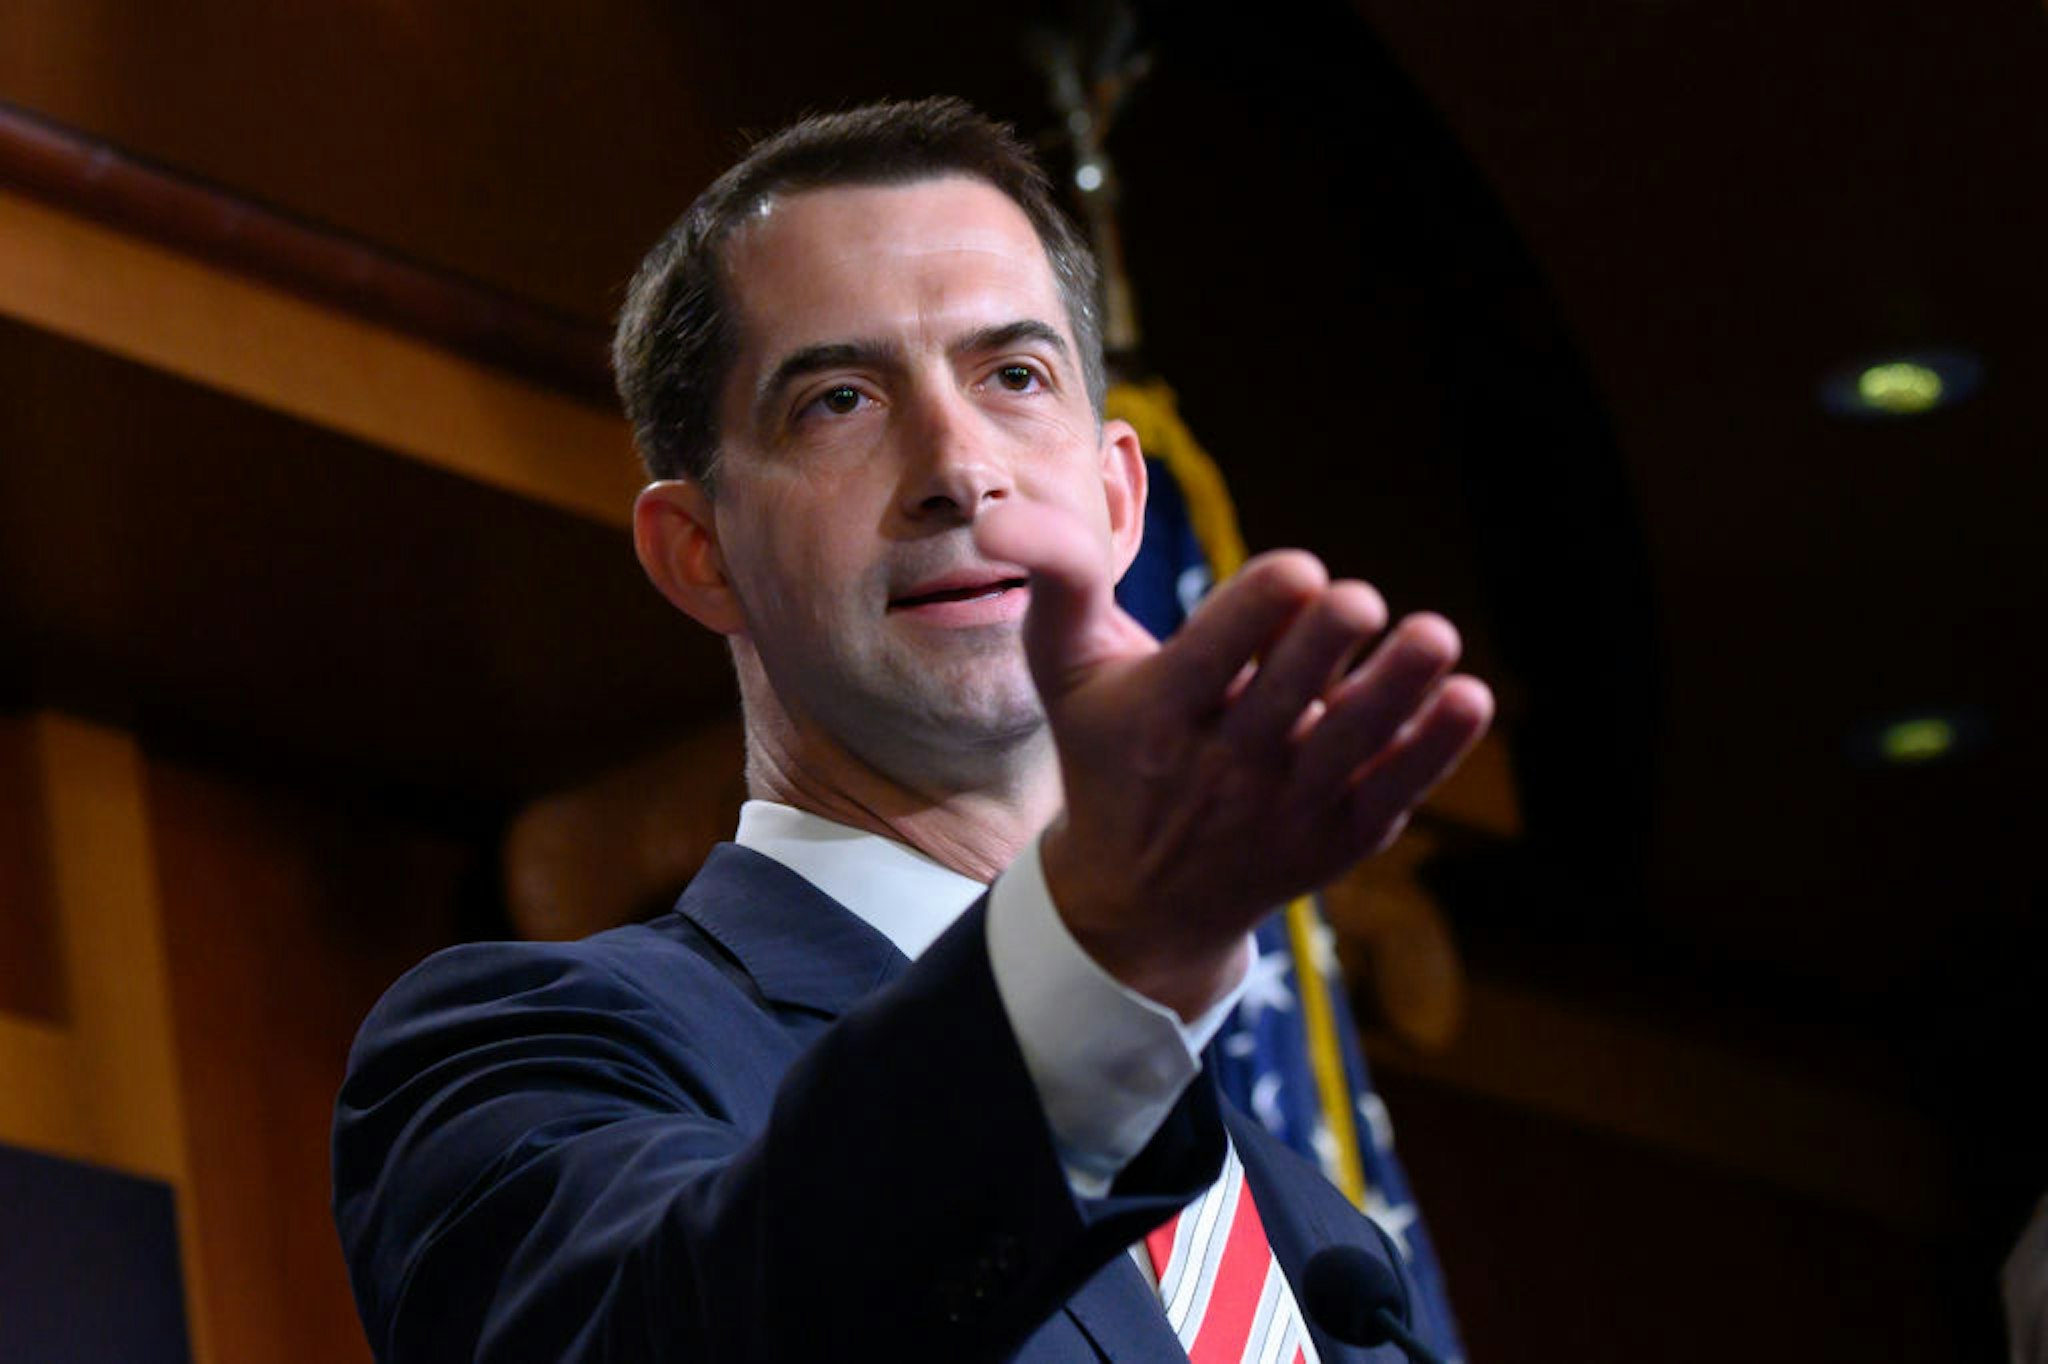 Senator Tom Cotton, a Republican from Arkansas, speaks during a news conference on Republican opposition to statehood for the District of Columbia at the U.S. Capitol in Washington, D.C., U.S., on Wednesday, July 1, 2020.